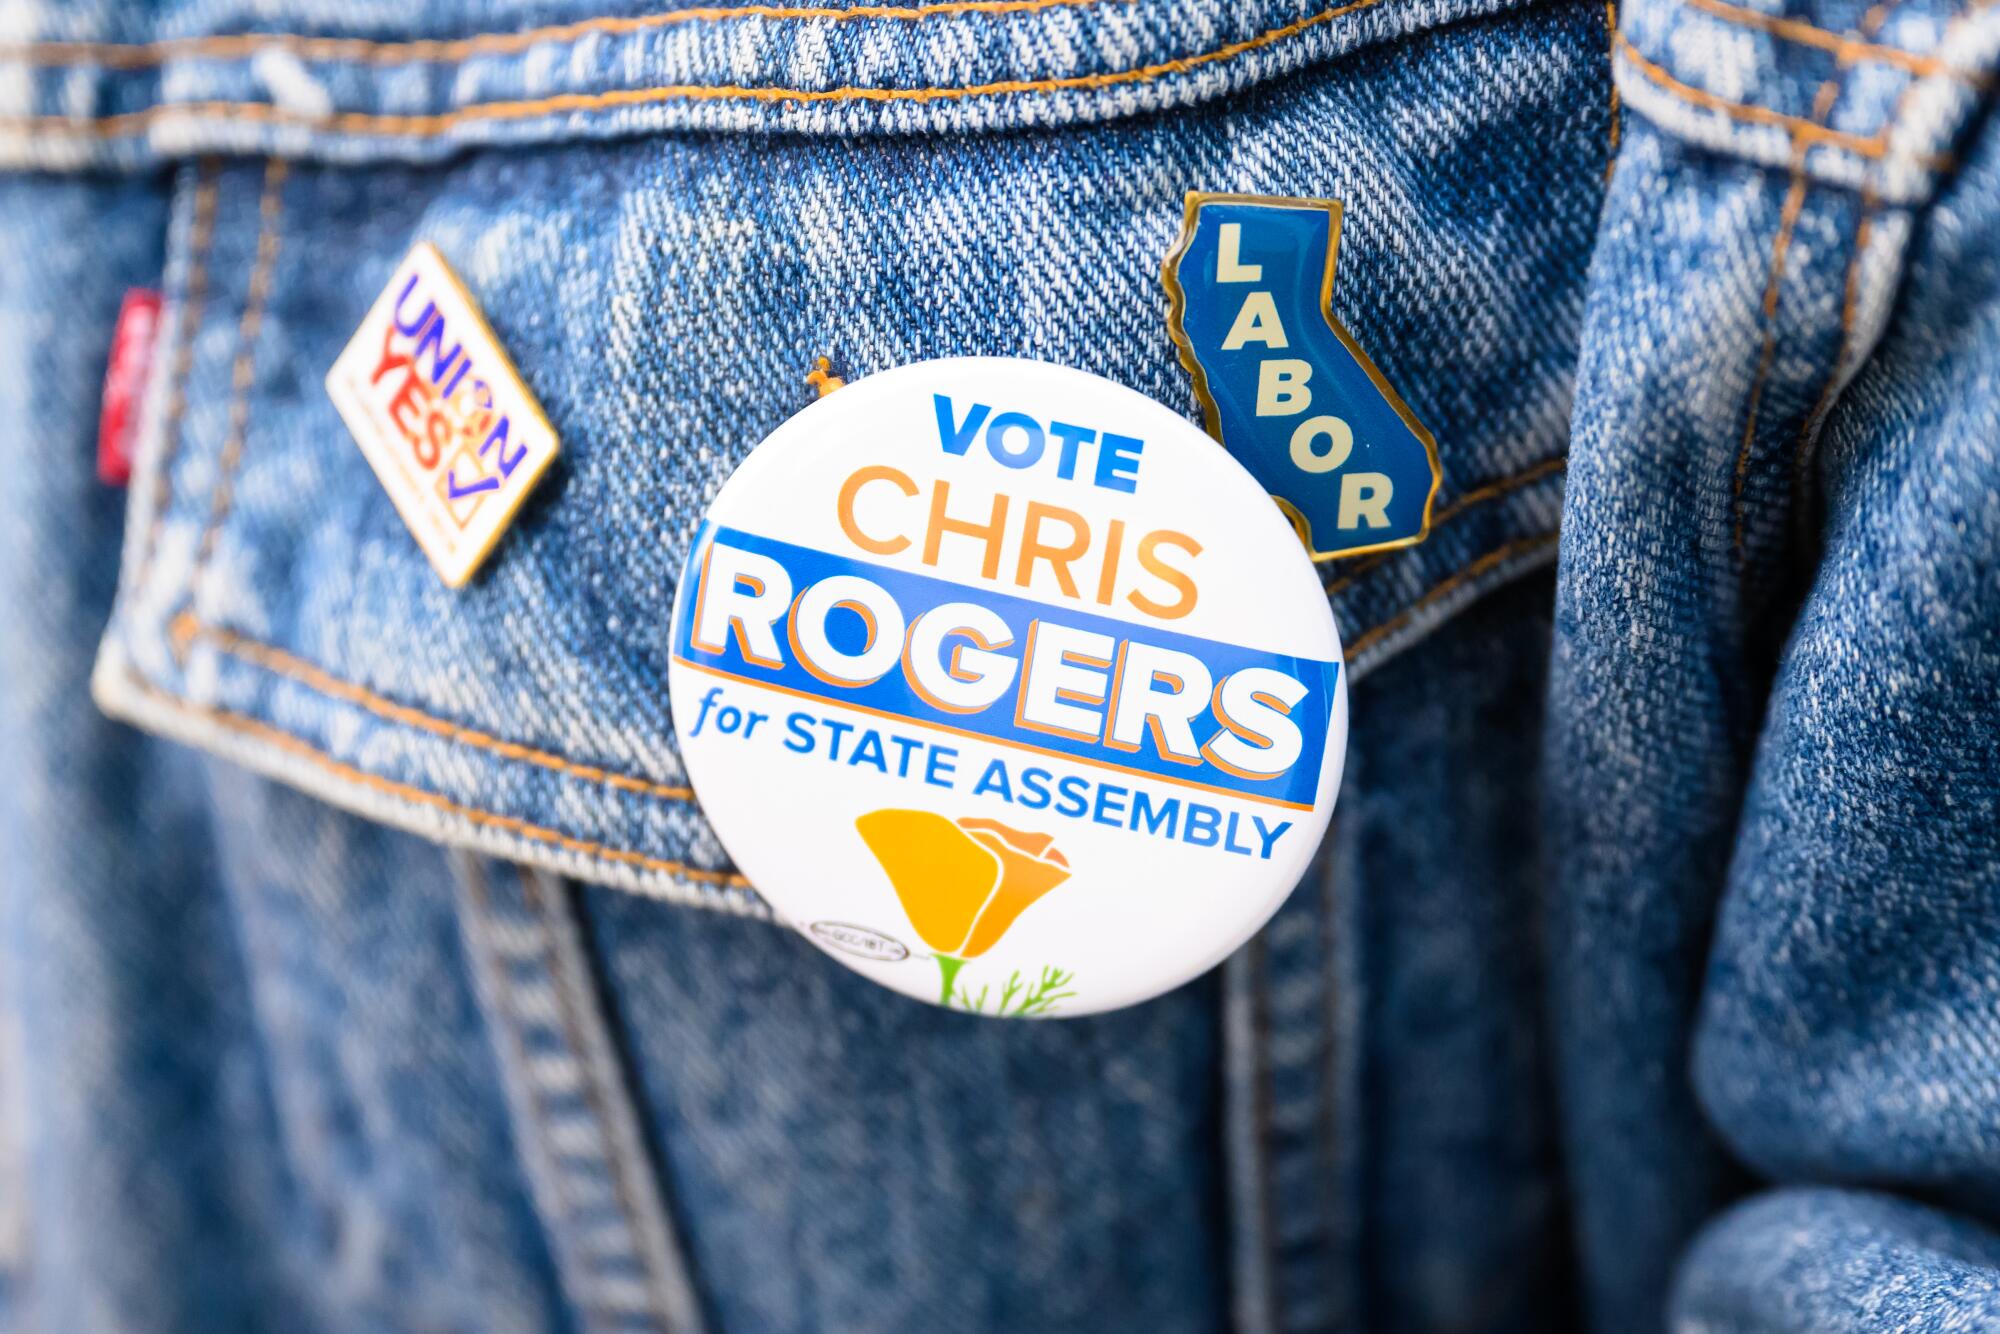 A campaign pin has "Vote Chris Rogers for State Assembly" written on it.